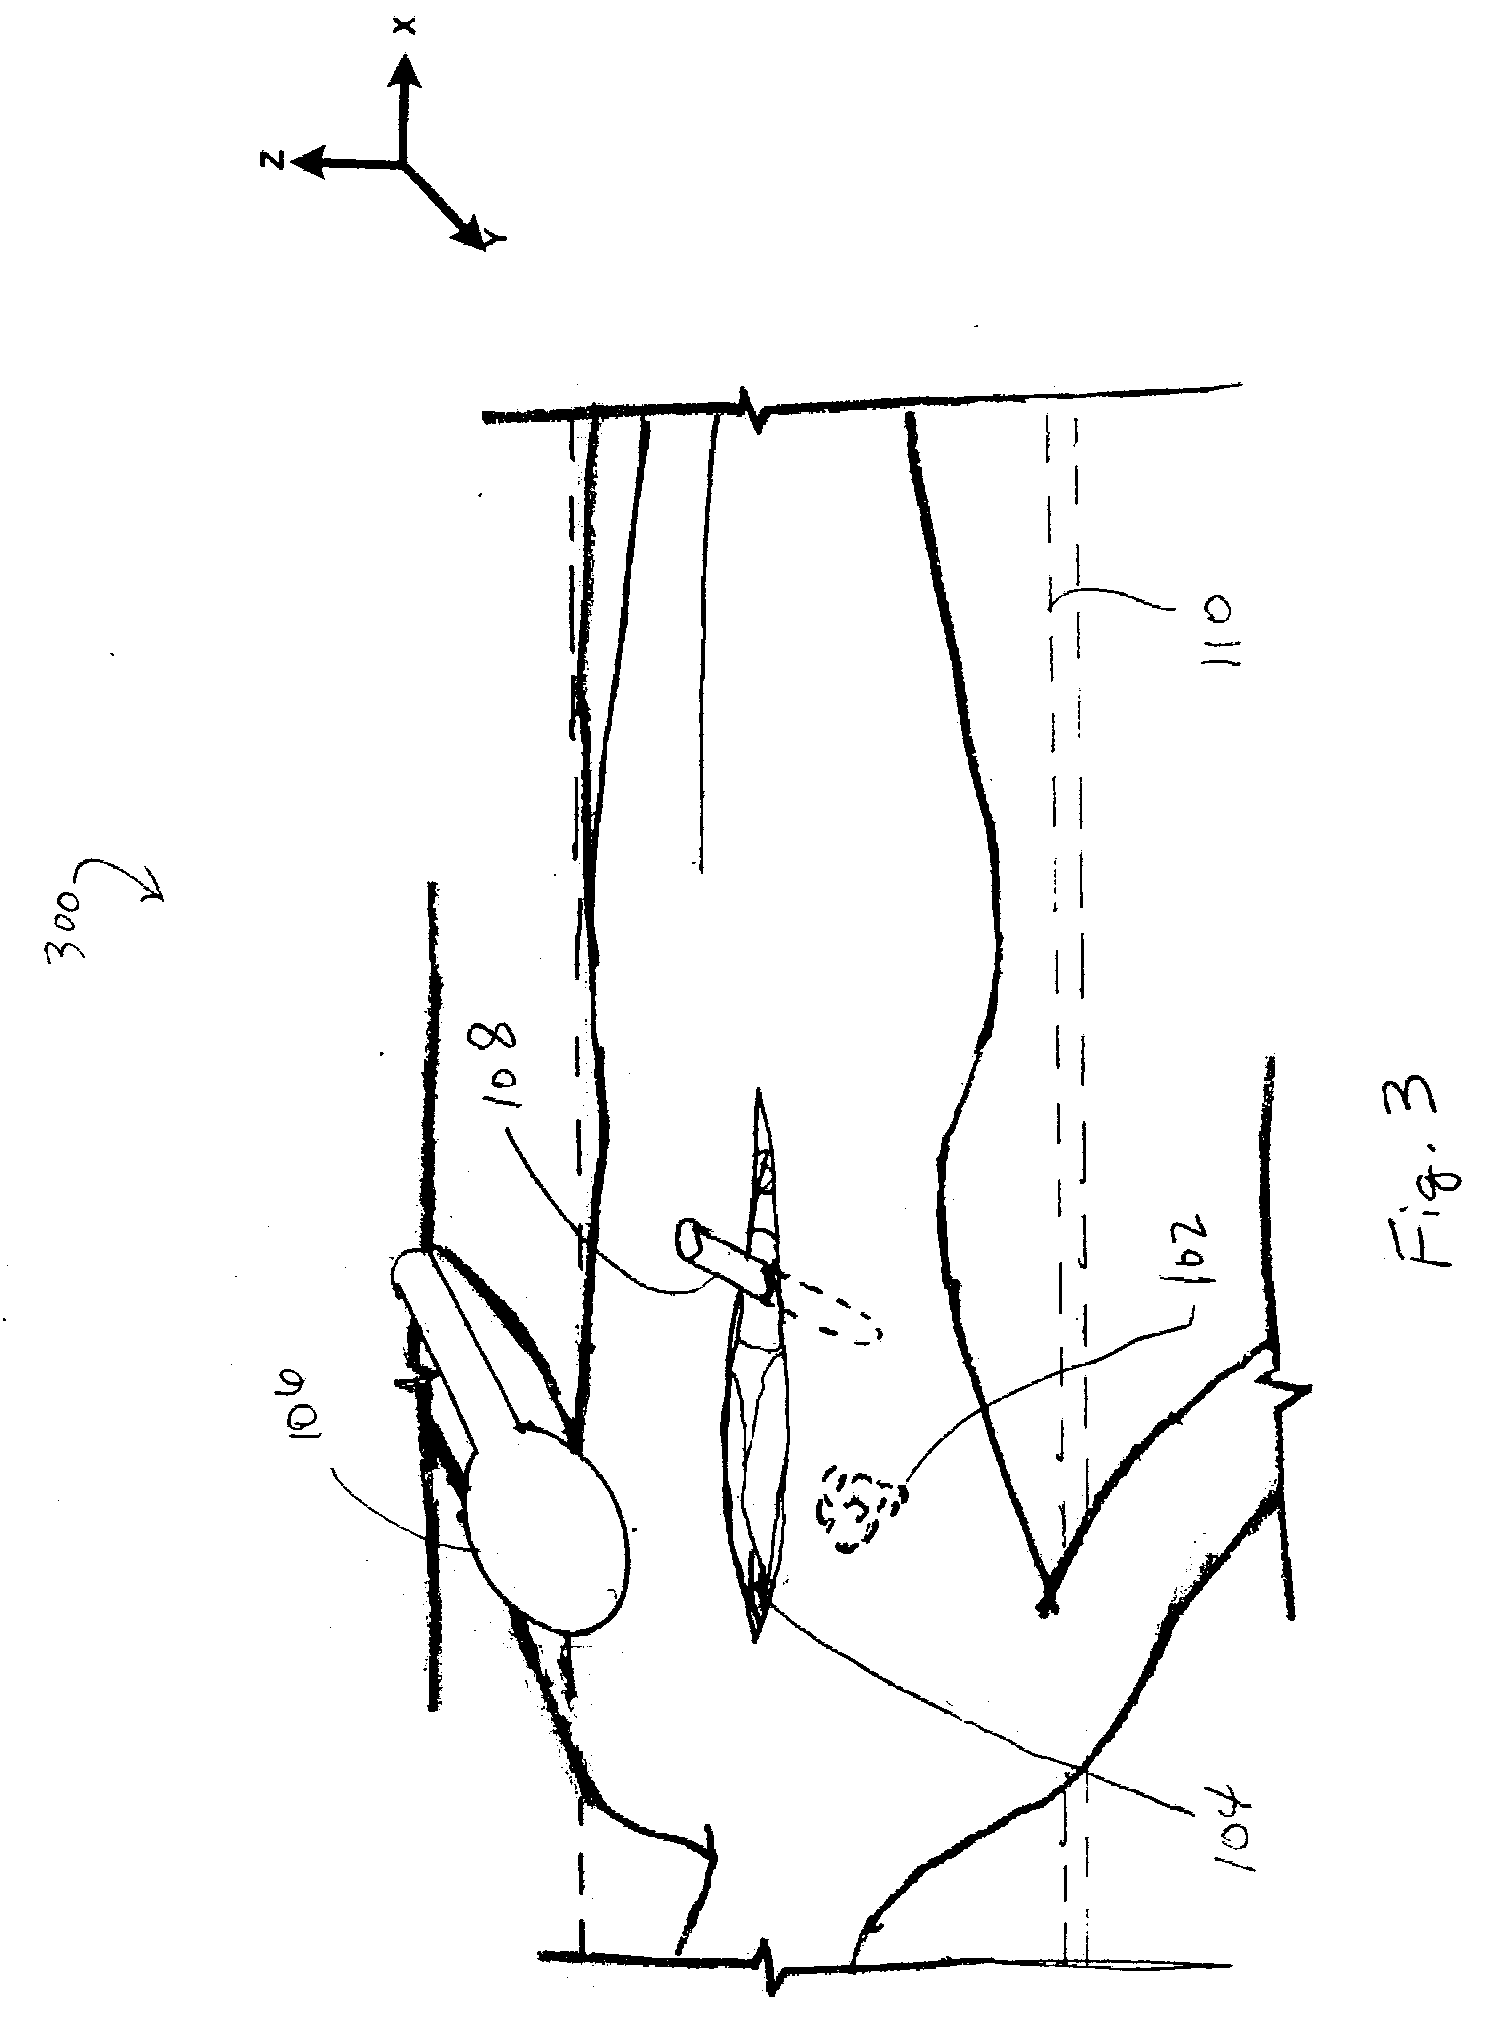 Medical surgical sponge and instrument detection system and method